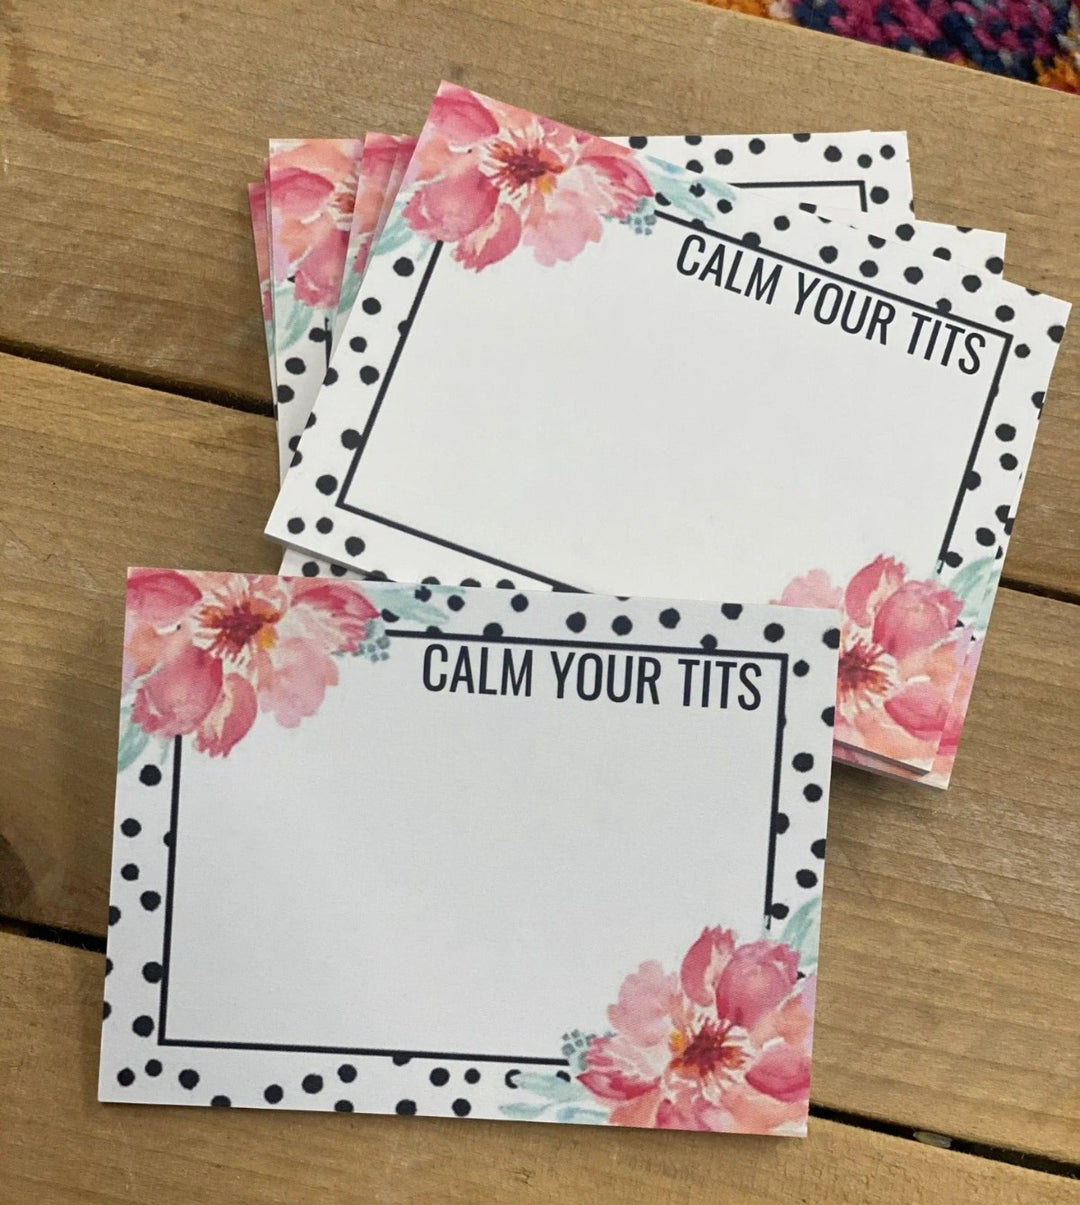 Assorted Sticky Notes | Calm Your Tits | Decorated with black an white polka dots and pink florals.